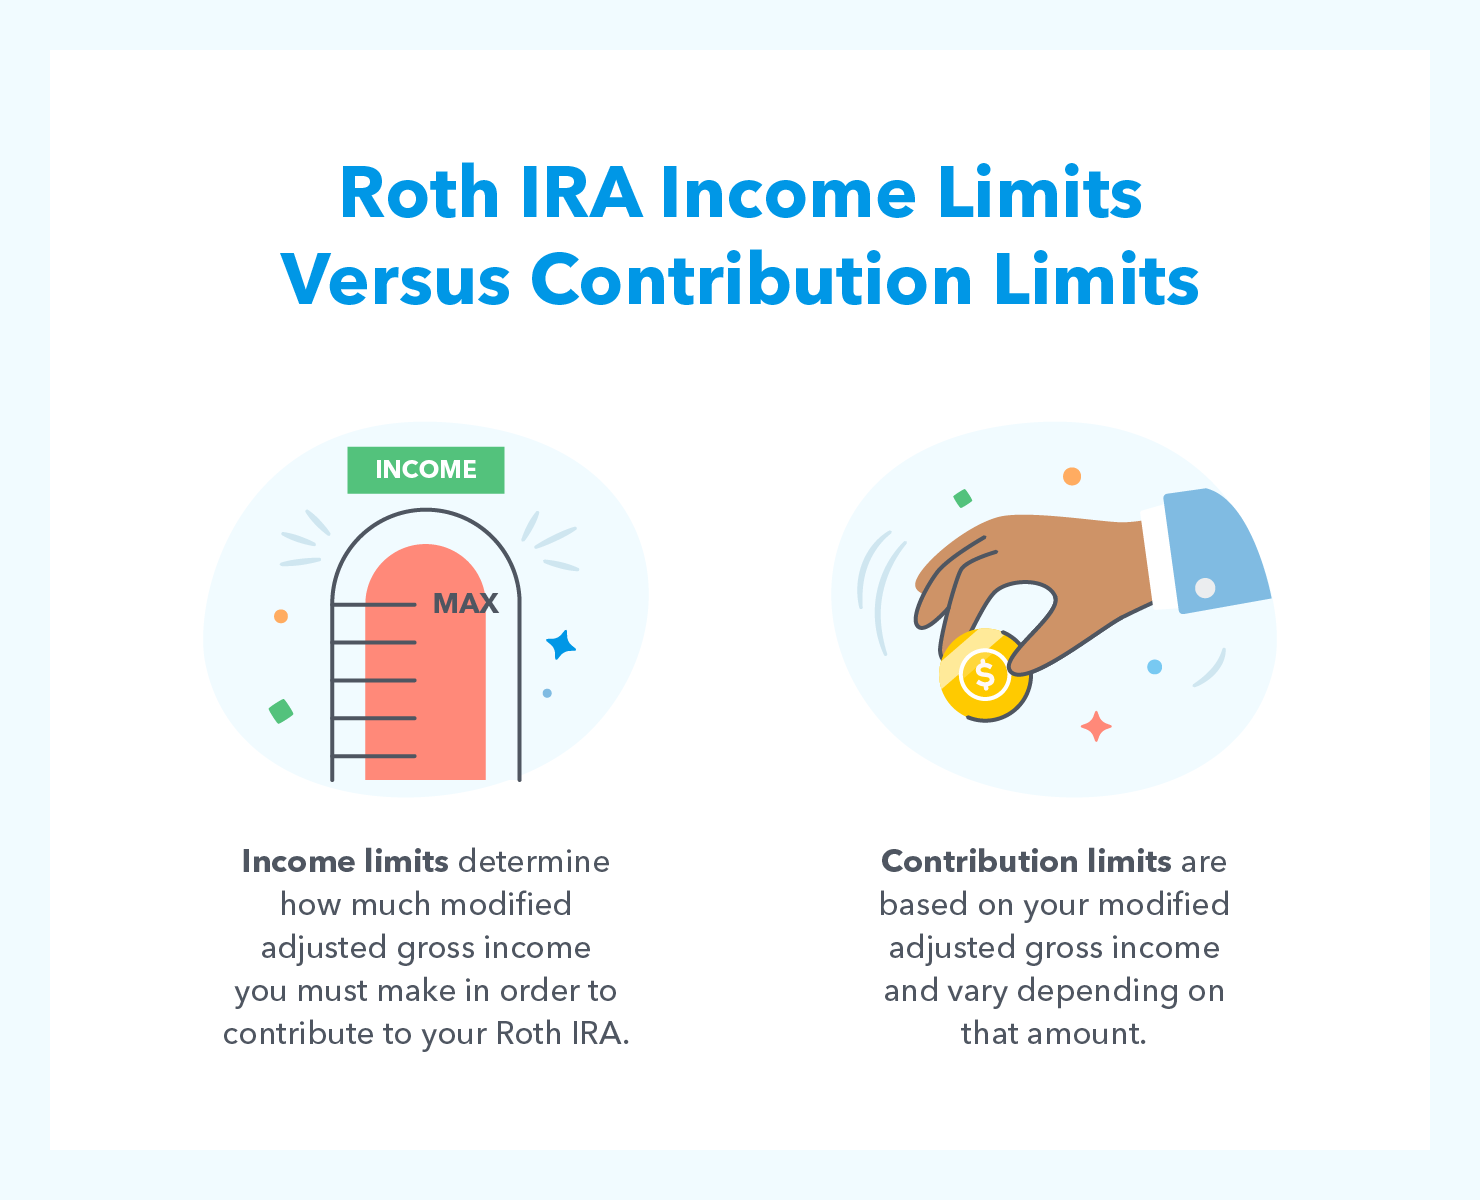 Roth IRA: Who Can Contribute?